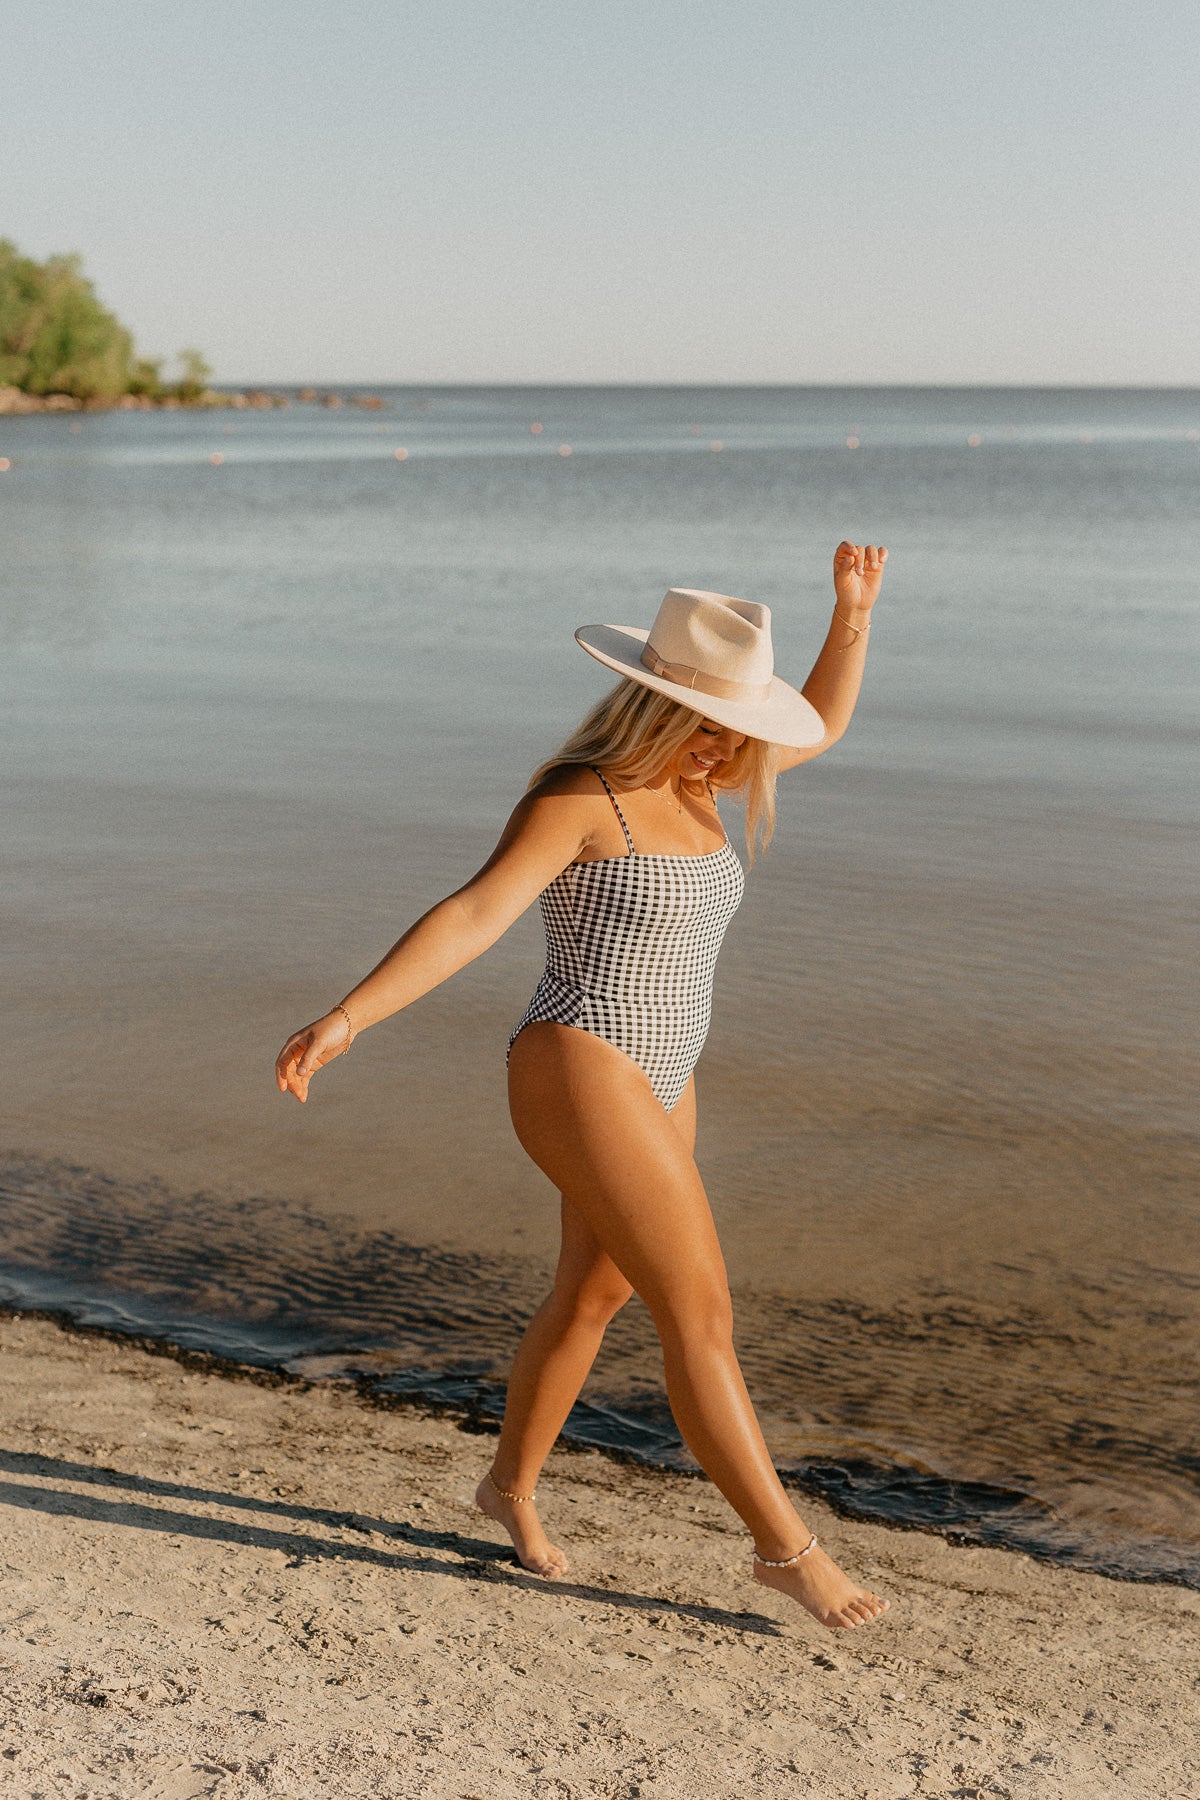 Influencer Nicole Zajac wears North American swimwear brand Prairie Swim chic straight neckline black and white gingham check print one piece swimsuit with adjustable straps, cinched waist and high cut legs